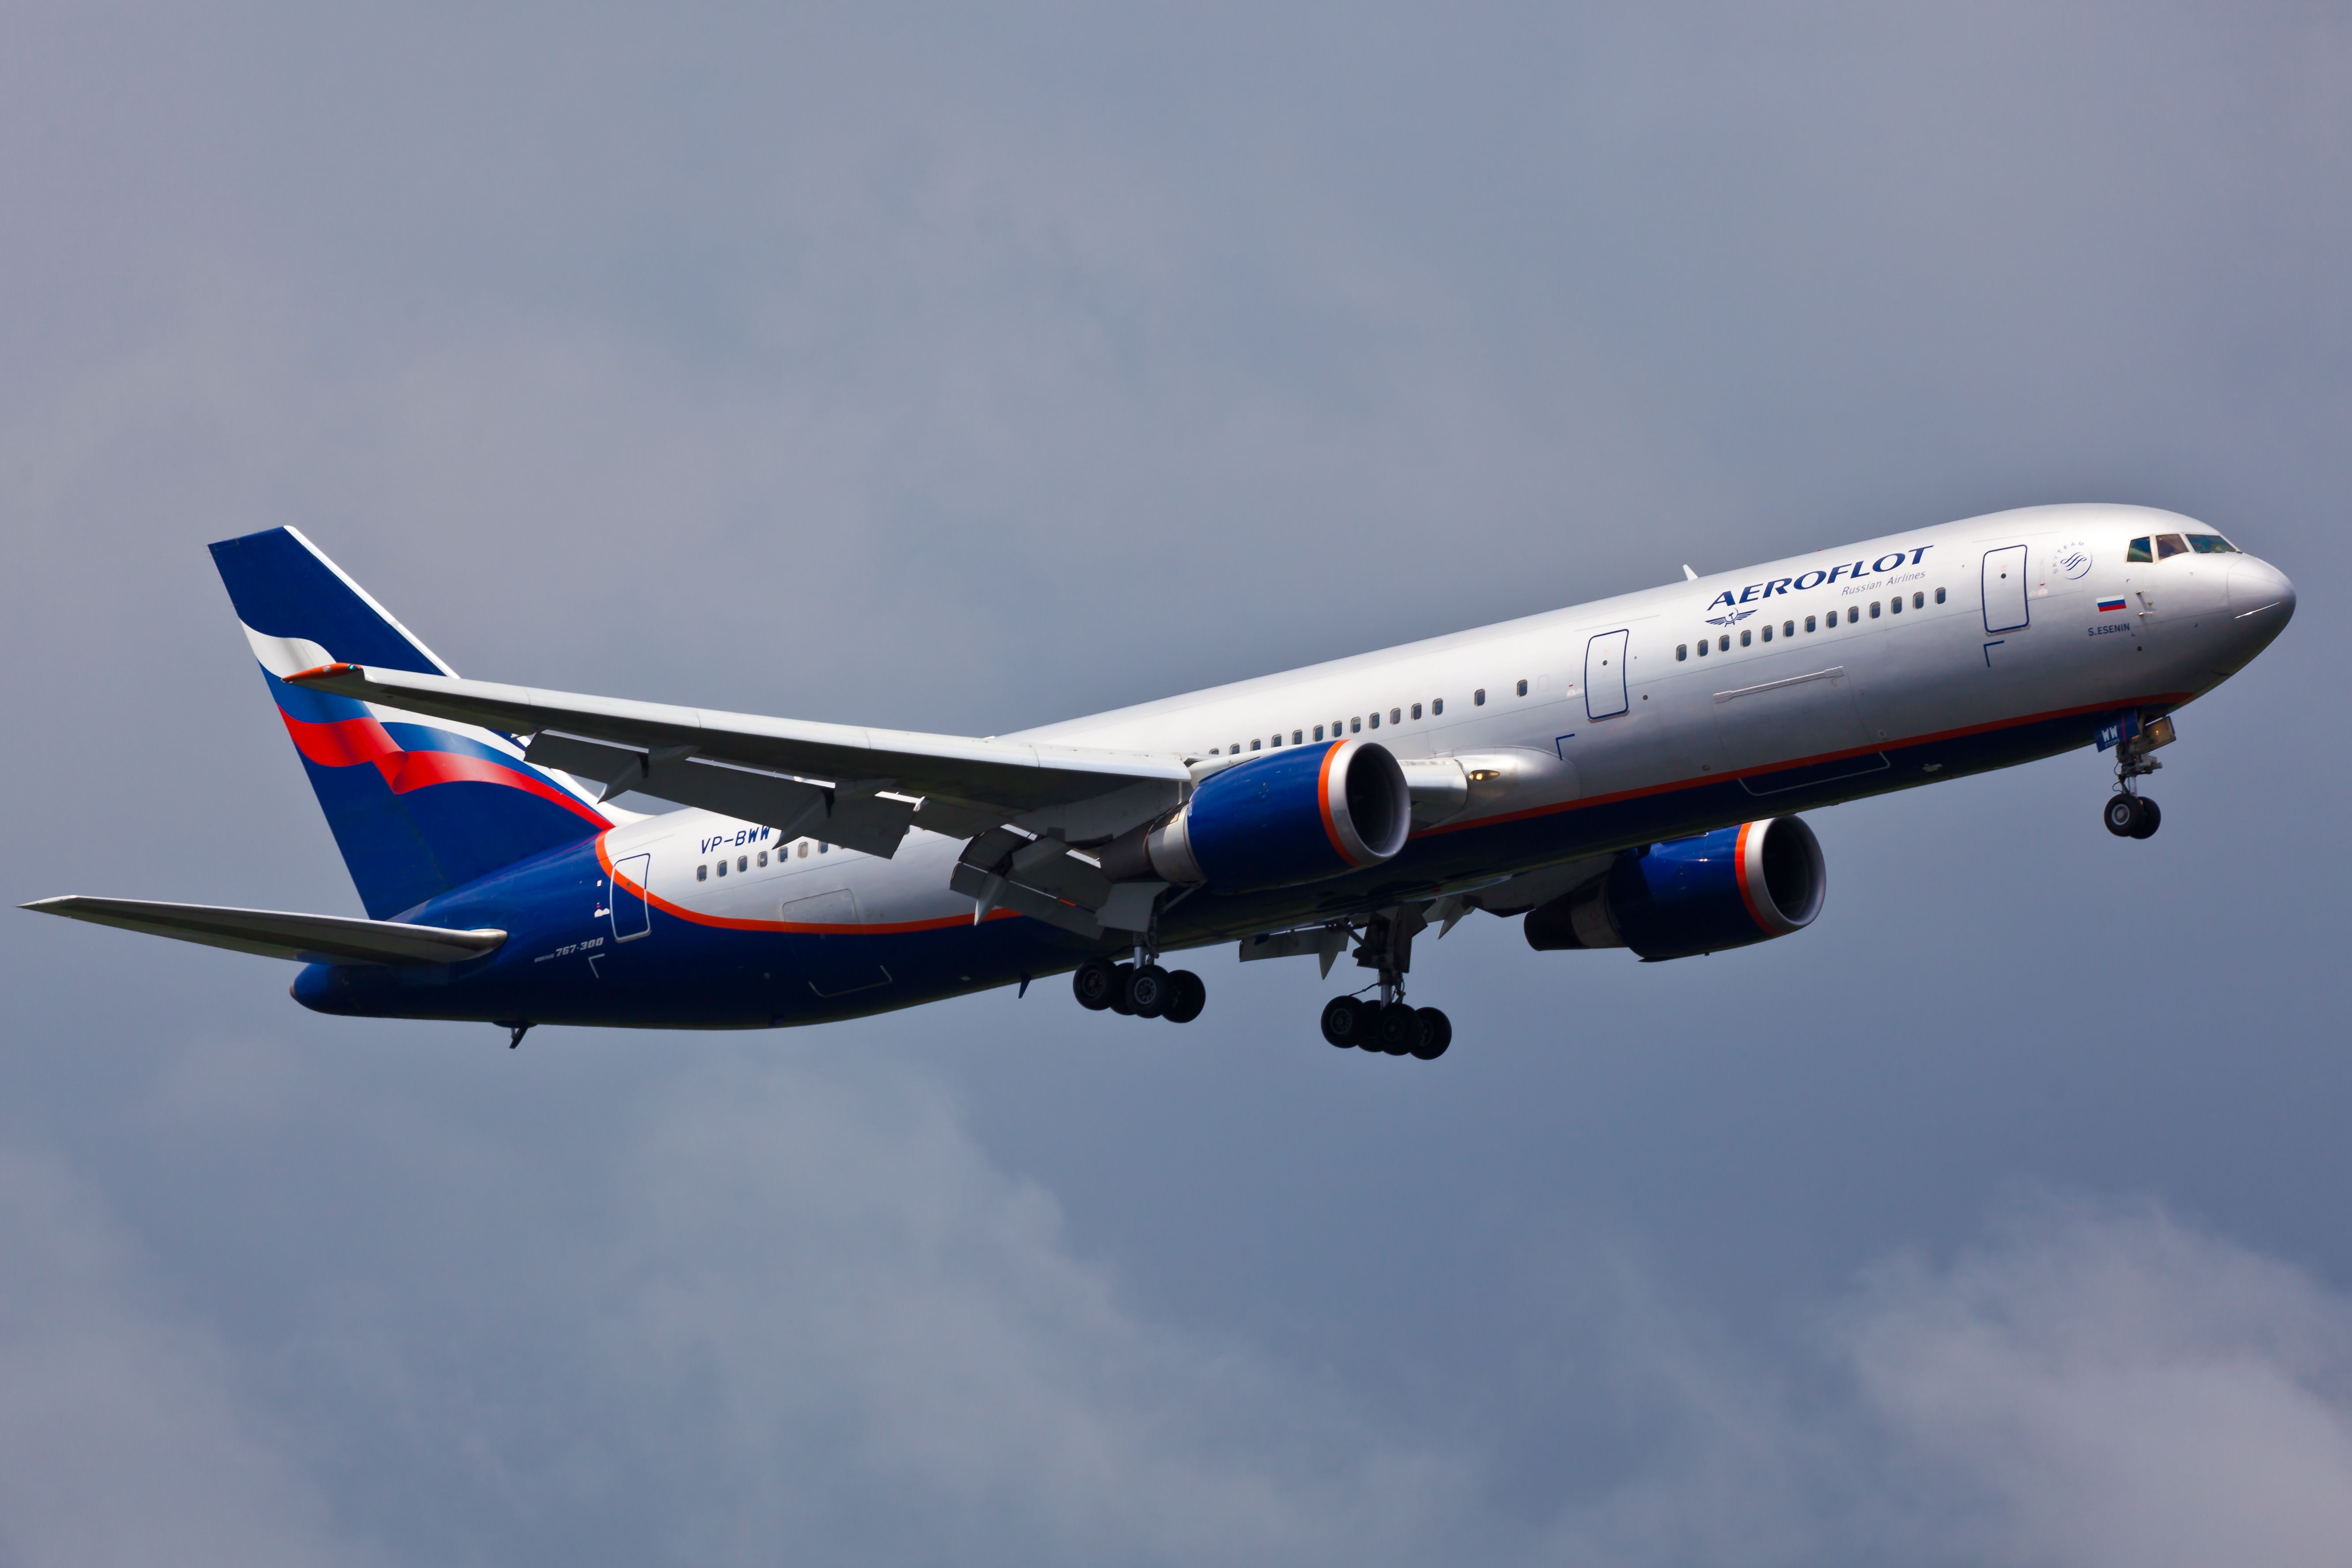 Aeroflot Airbus A330 in the sky